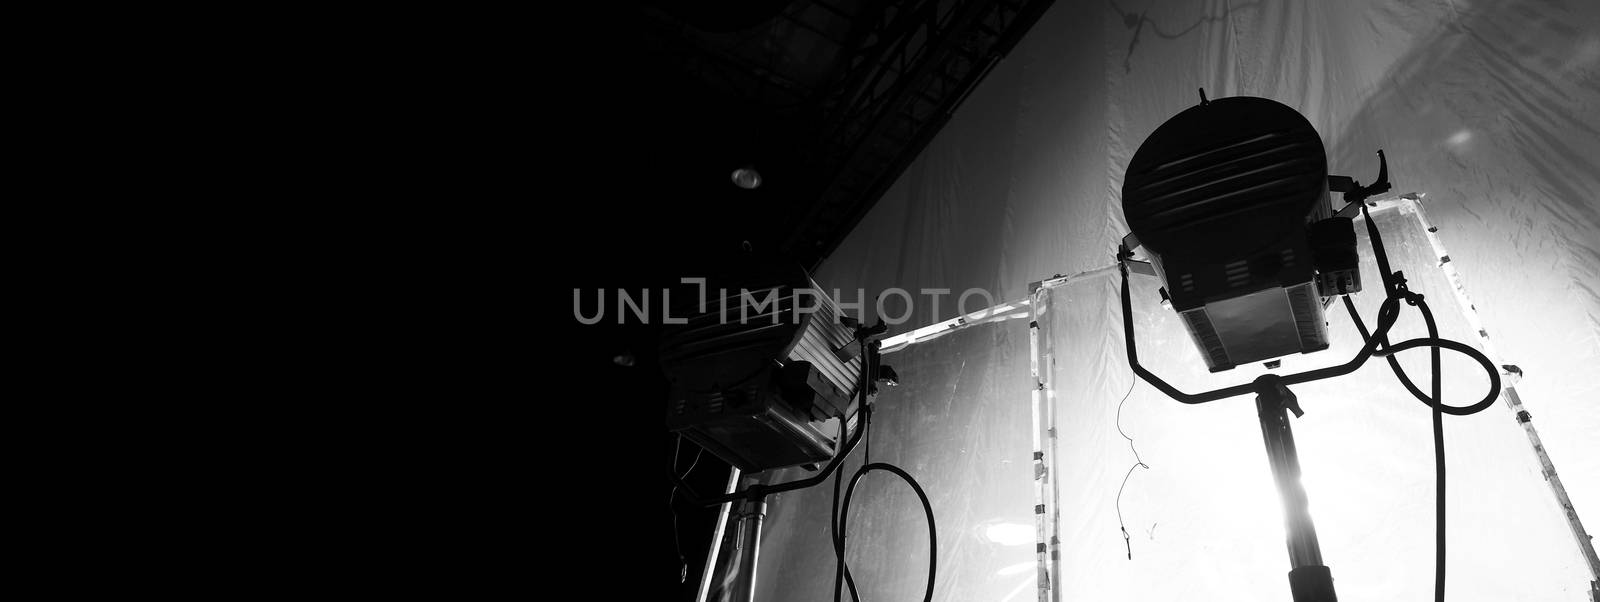 Black and white images of big studio continue LED light for video or film movie production on professional strong steel tripod and promt for shooting or set framing for director